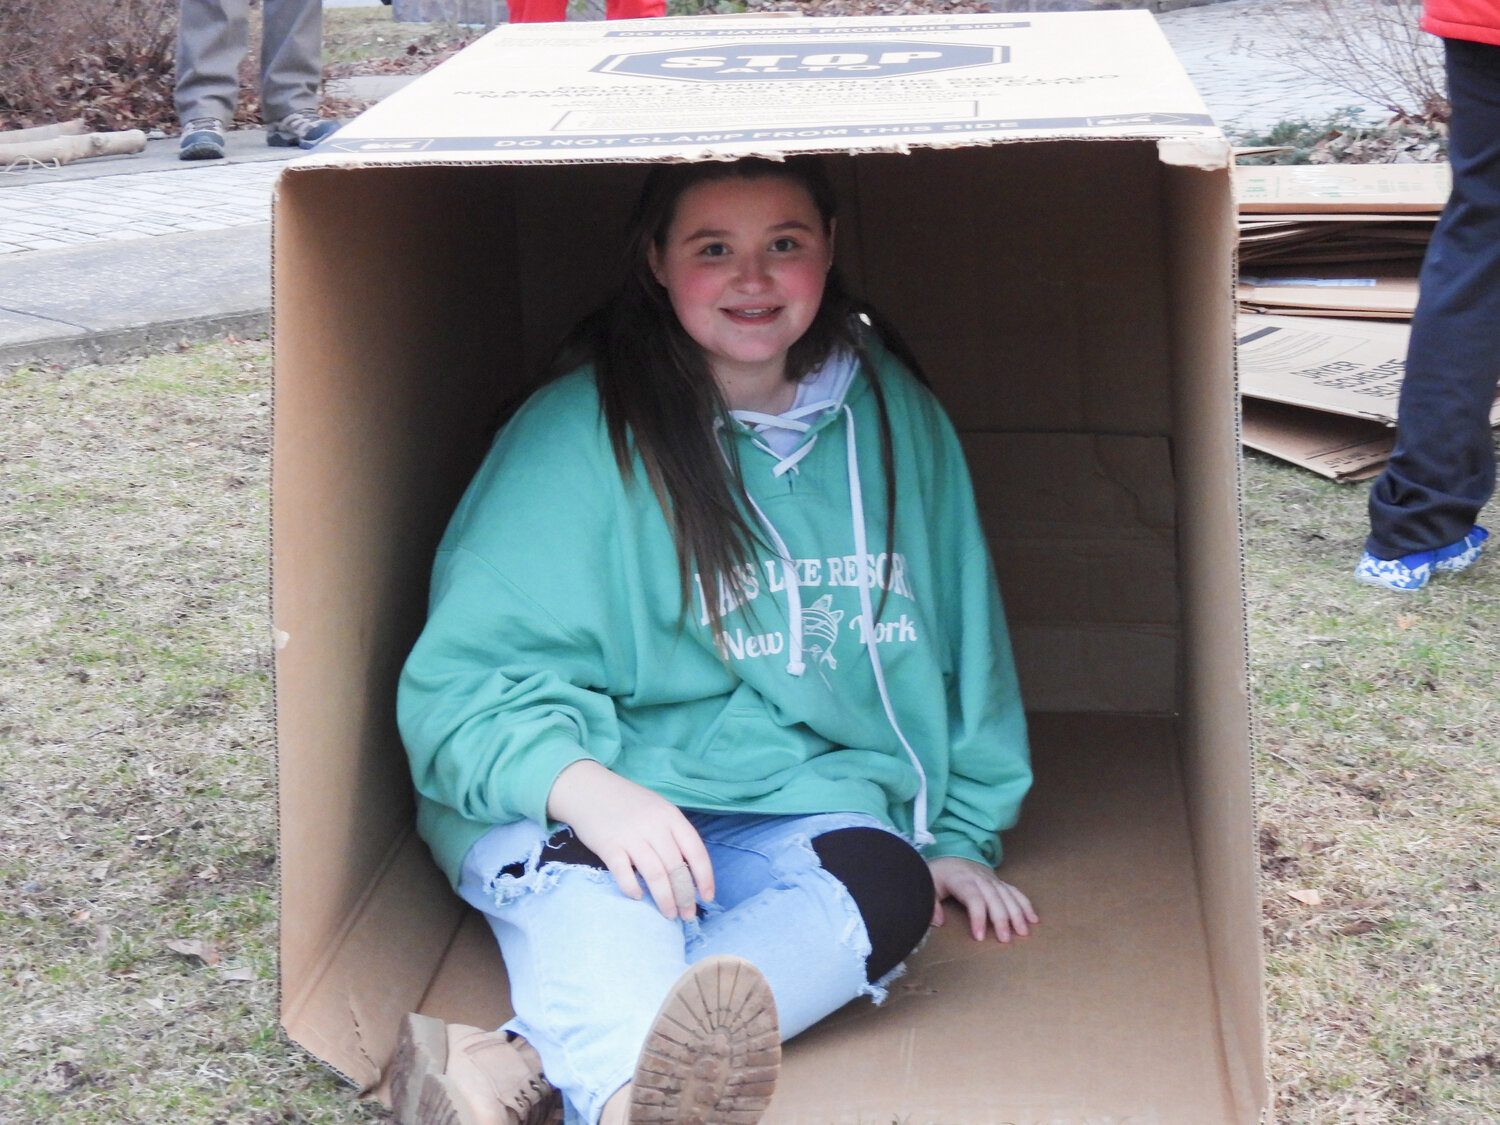 Oneida Scout Troop #2 sets up their cardboard shelters for the homelessness awareness sleep-out. Pictured is Courtney Clark, 12, a troop member and Oneida Middle Schoole.